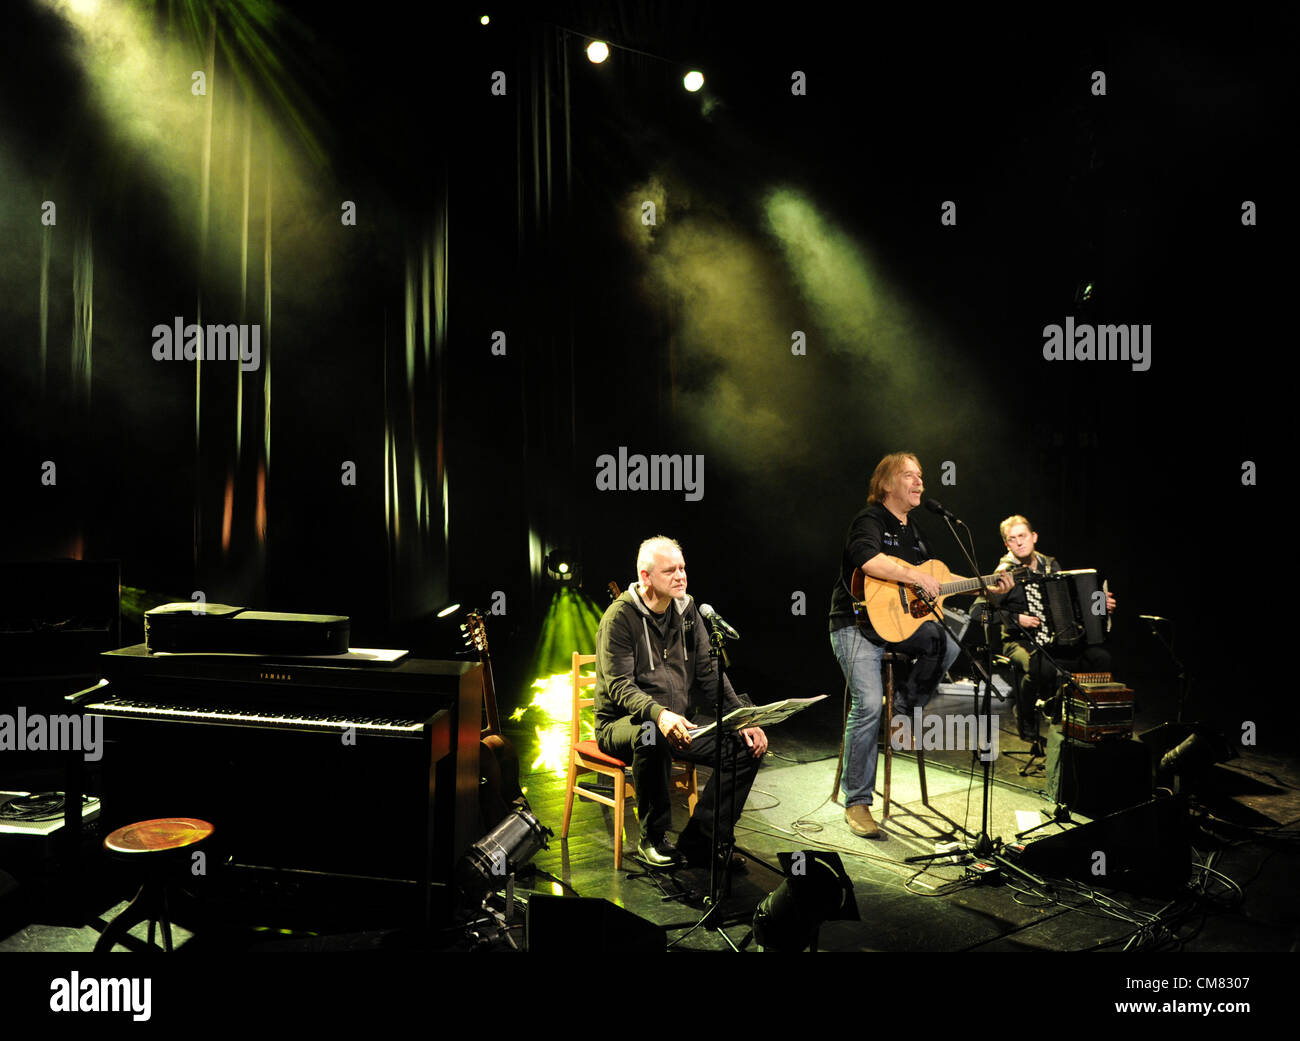 Czech singer and songwriter Jaromir Nohavica (centre) and German Stock  Photo - Alamy